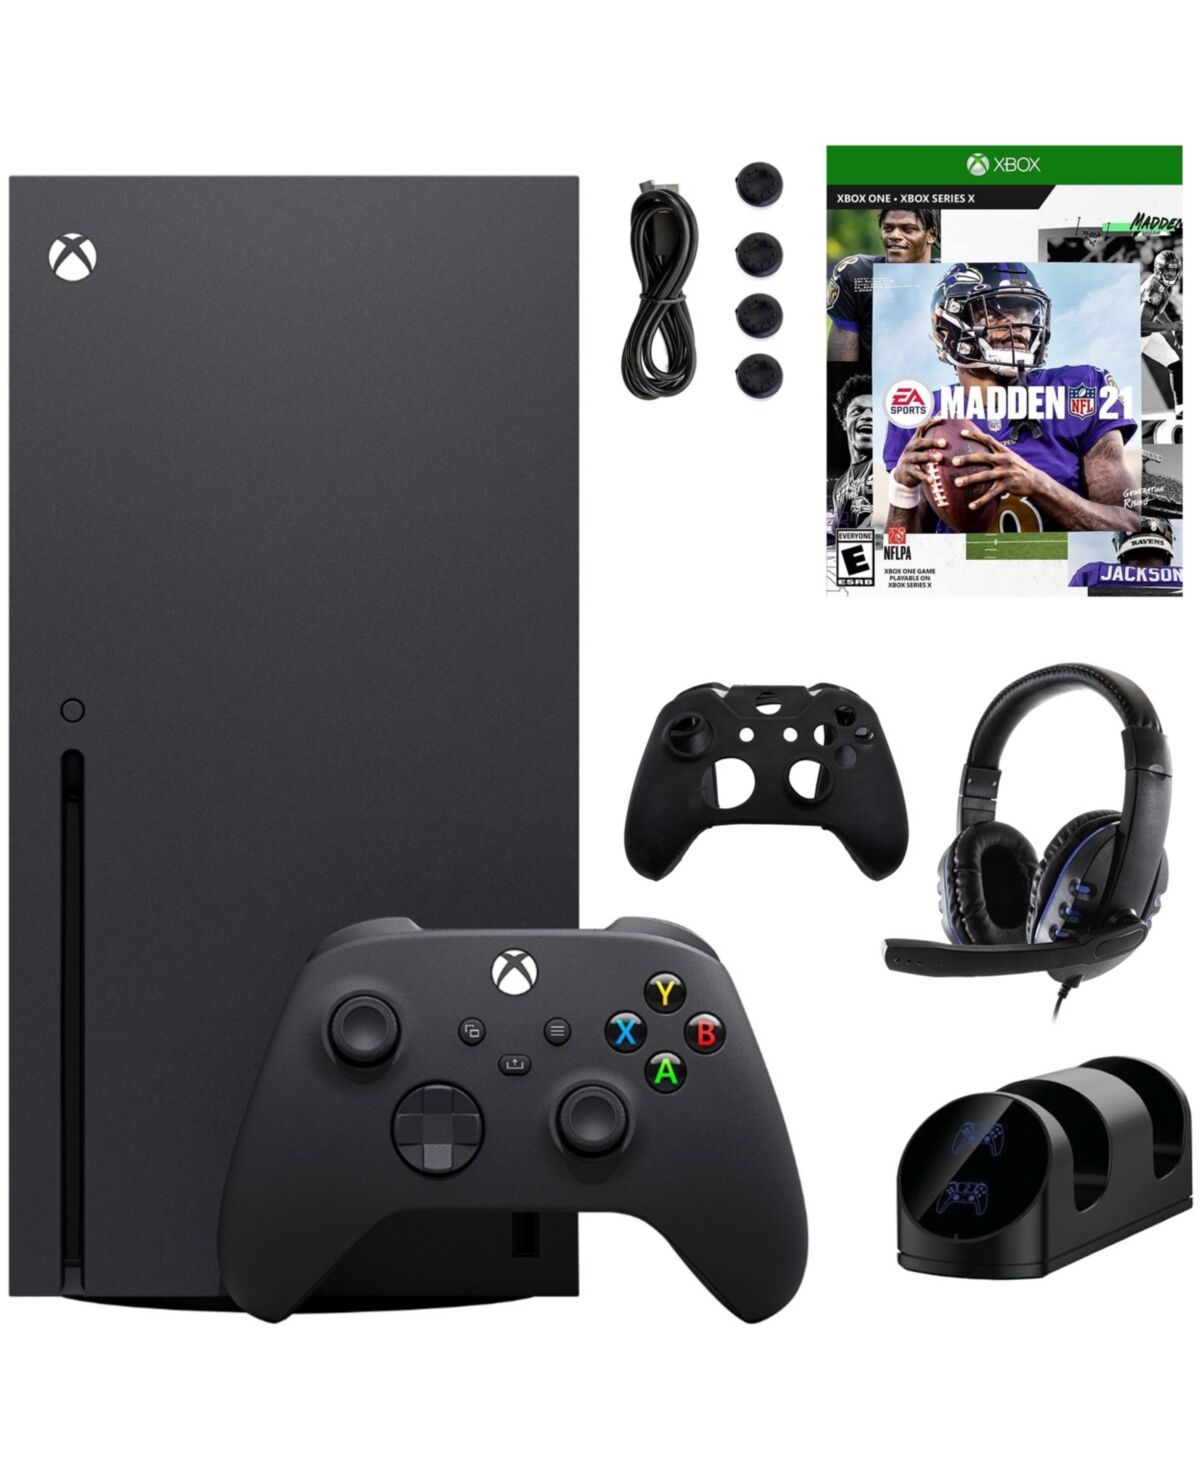 Xbox Series X 1TB Console with Madden 21 and Accessories Kit - Black